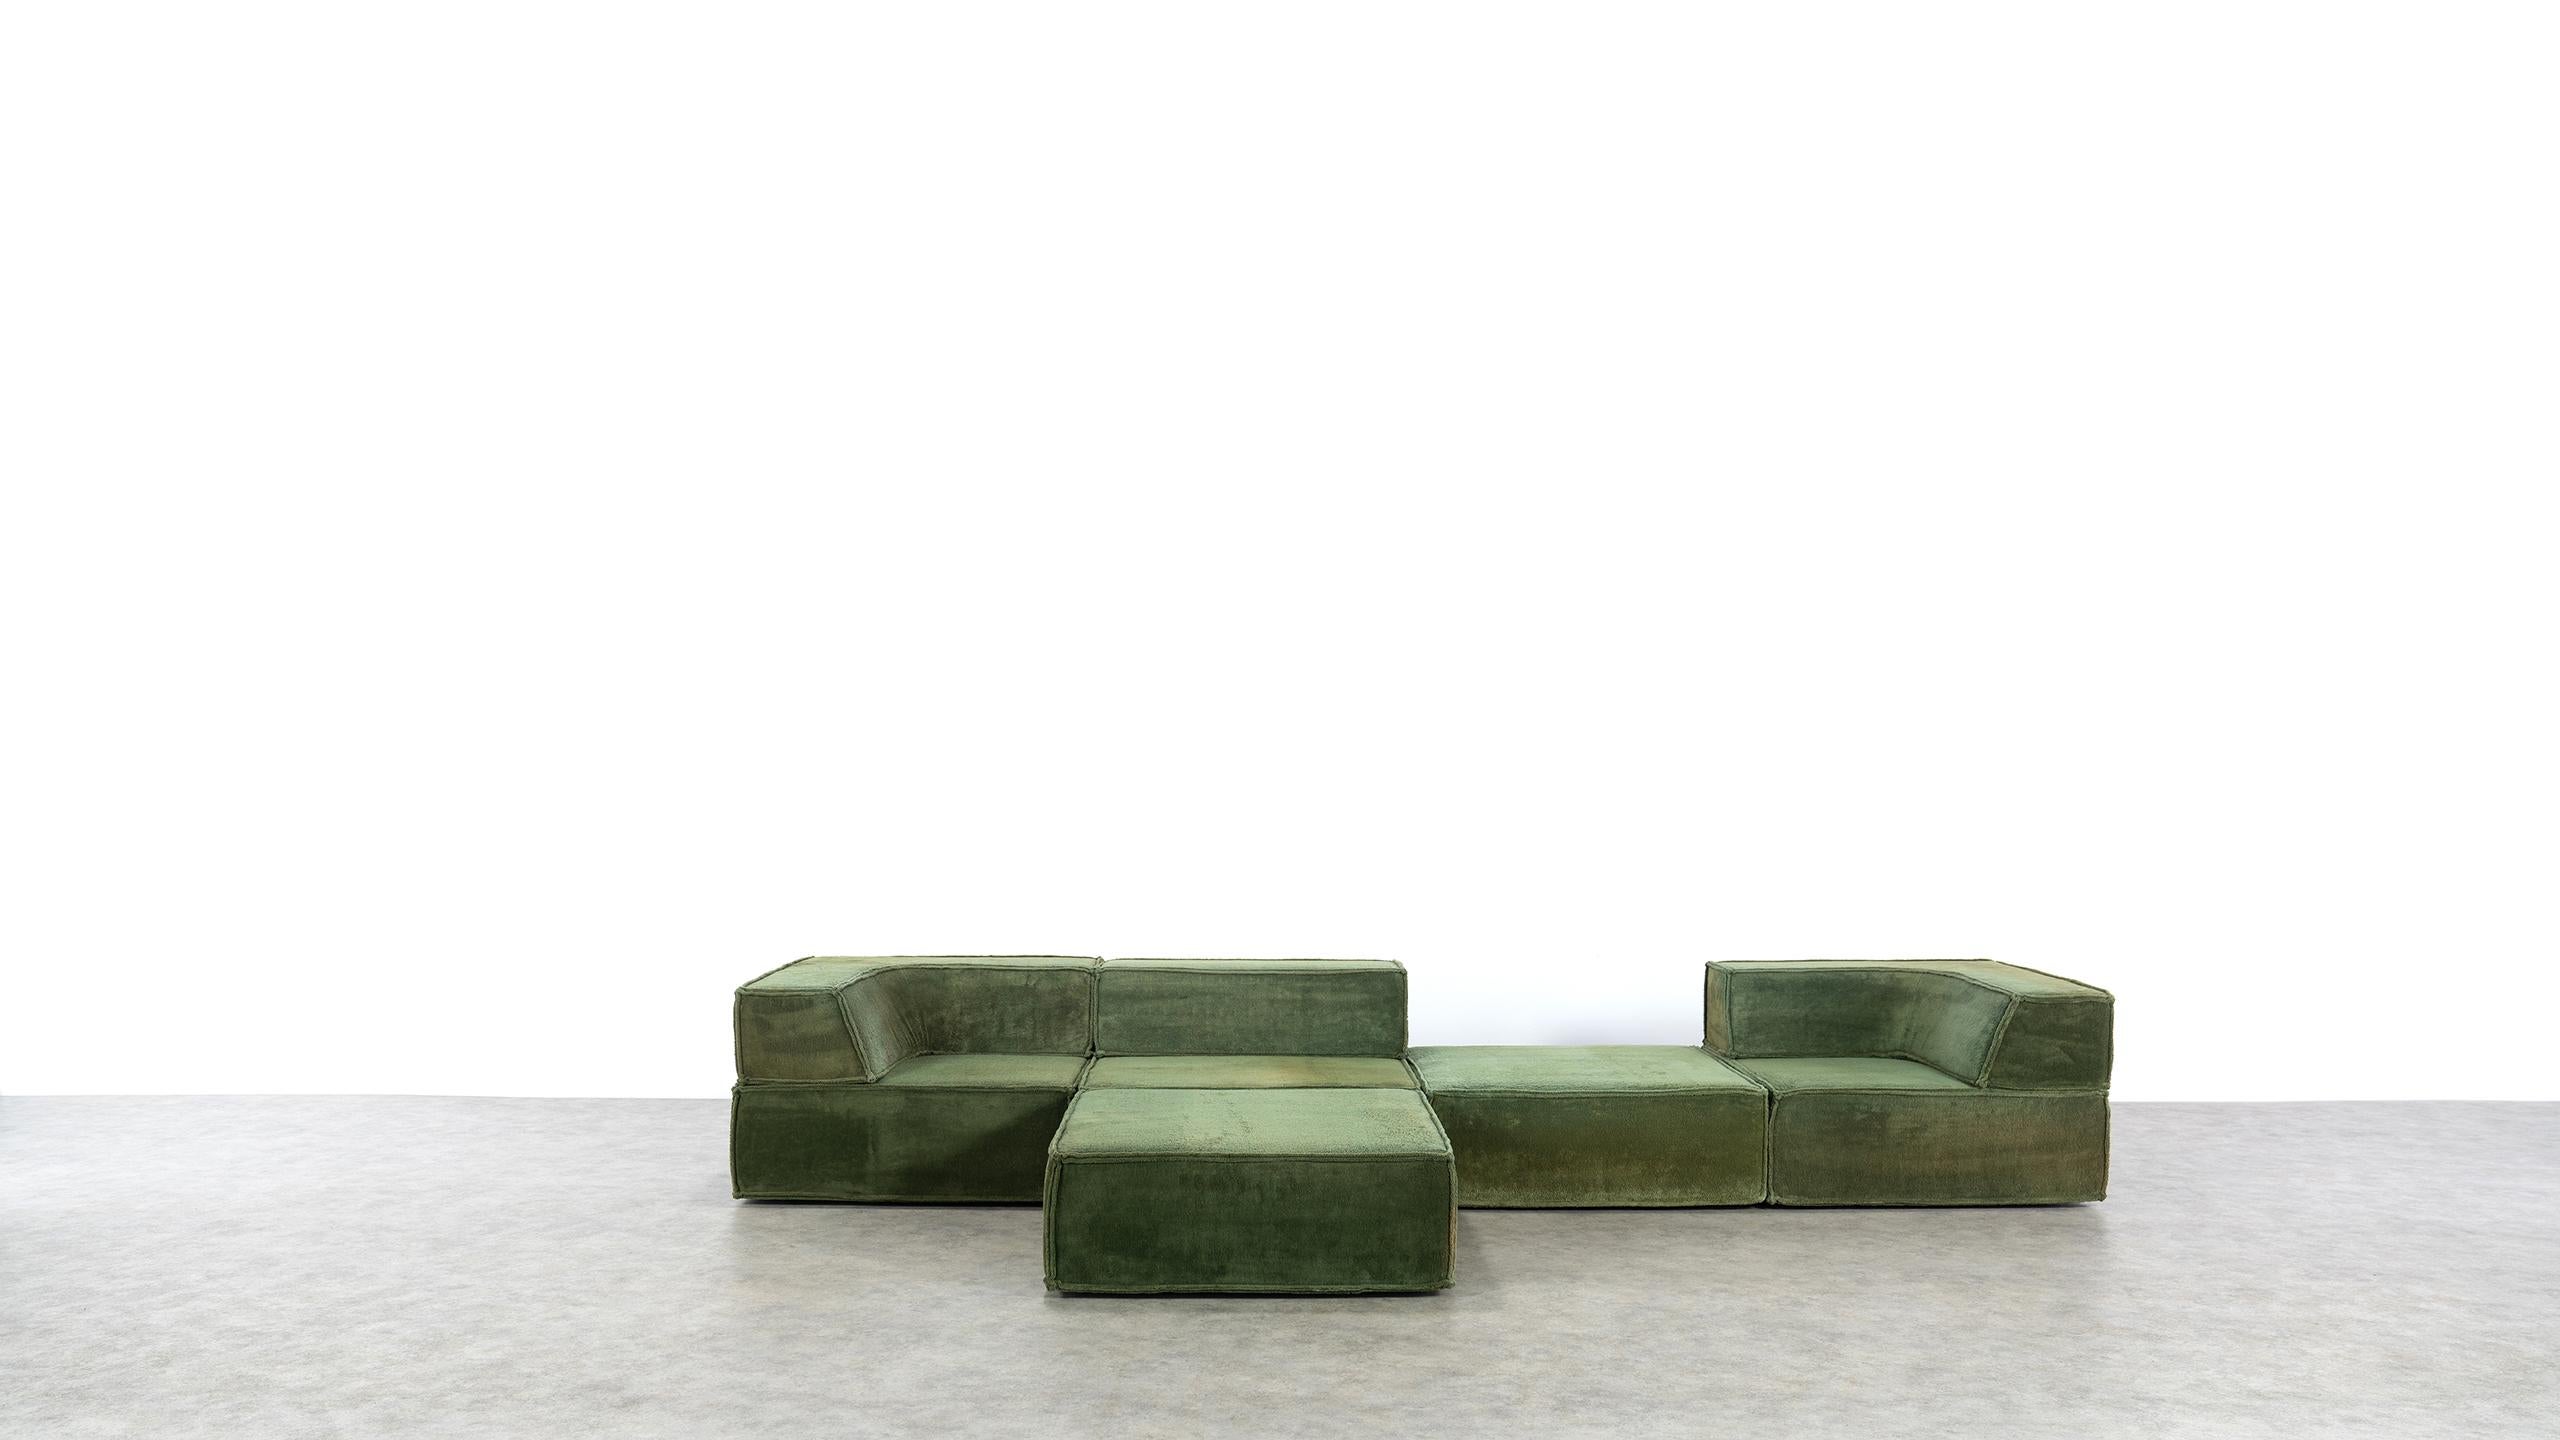 COR Trio Modular Sofa, Giant Landscape in Green, 1972 by Team Form AG, Swiss 1